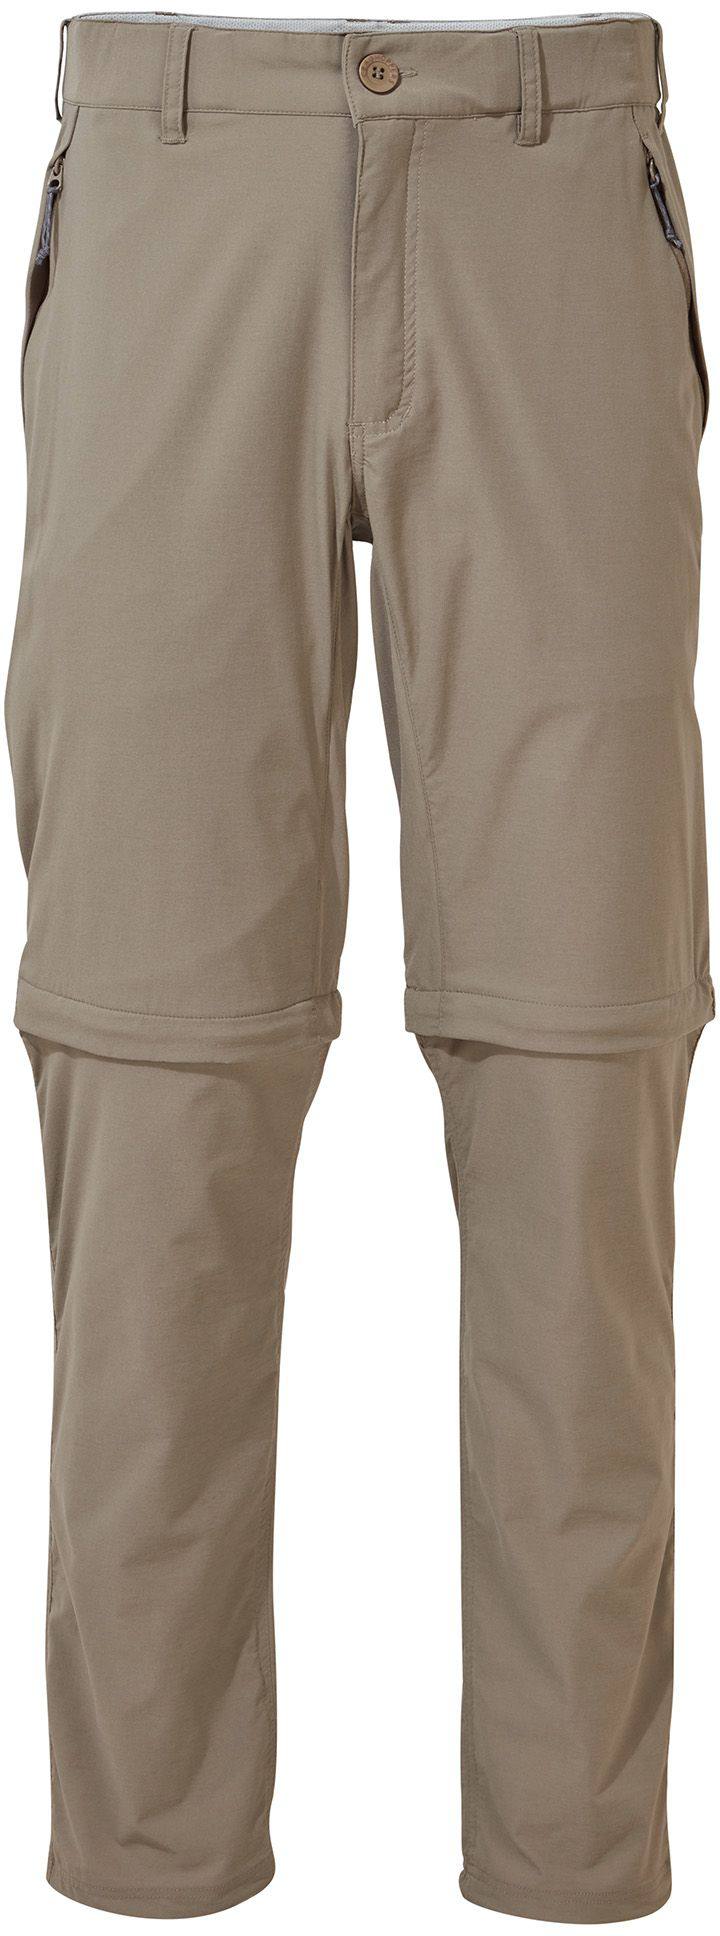 Craghoppers Nosilife Pro II Convertible Long Trousers